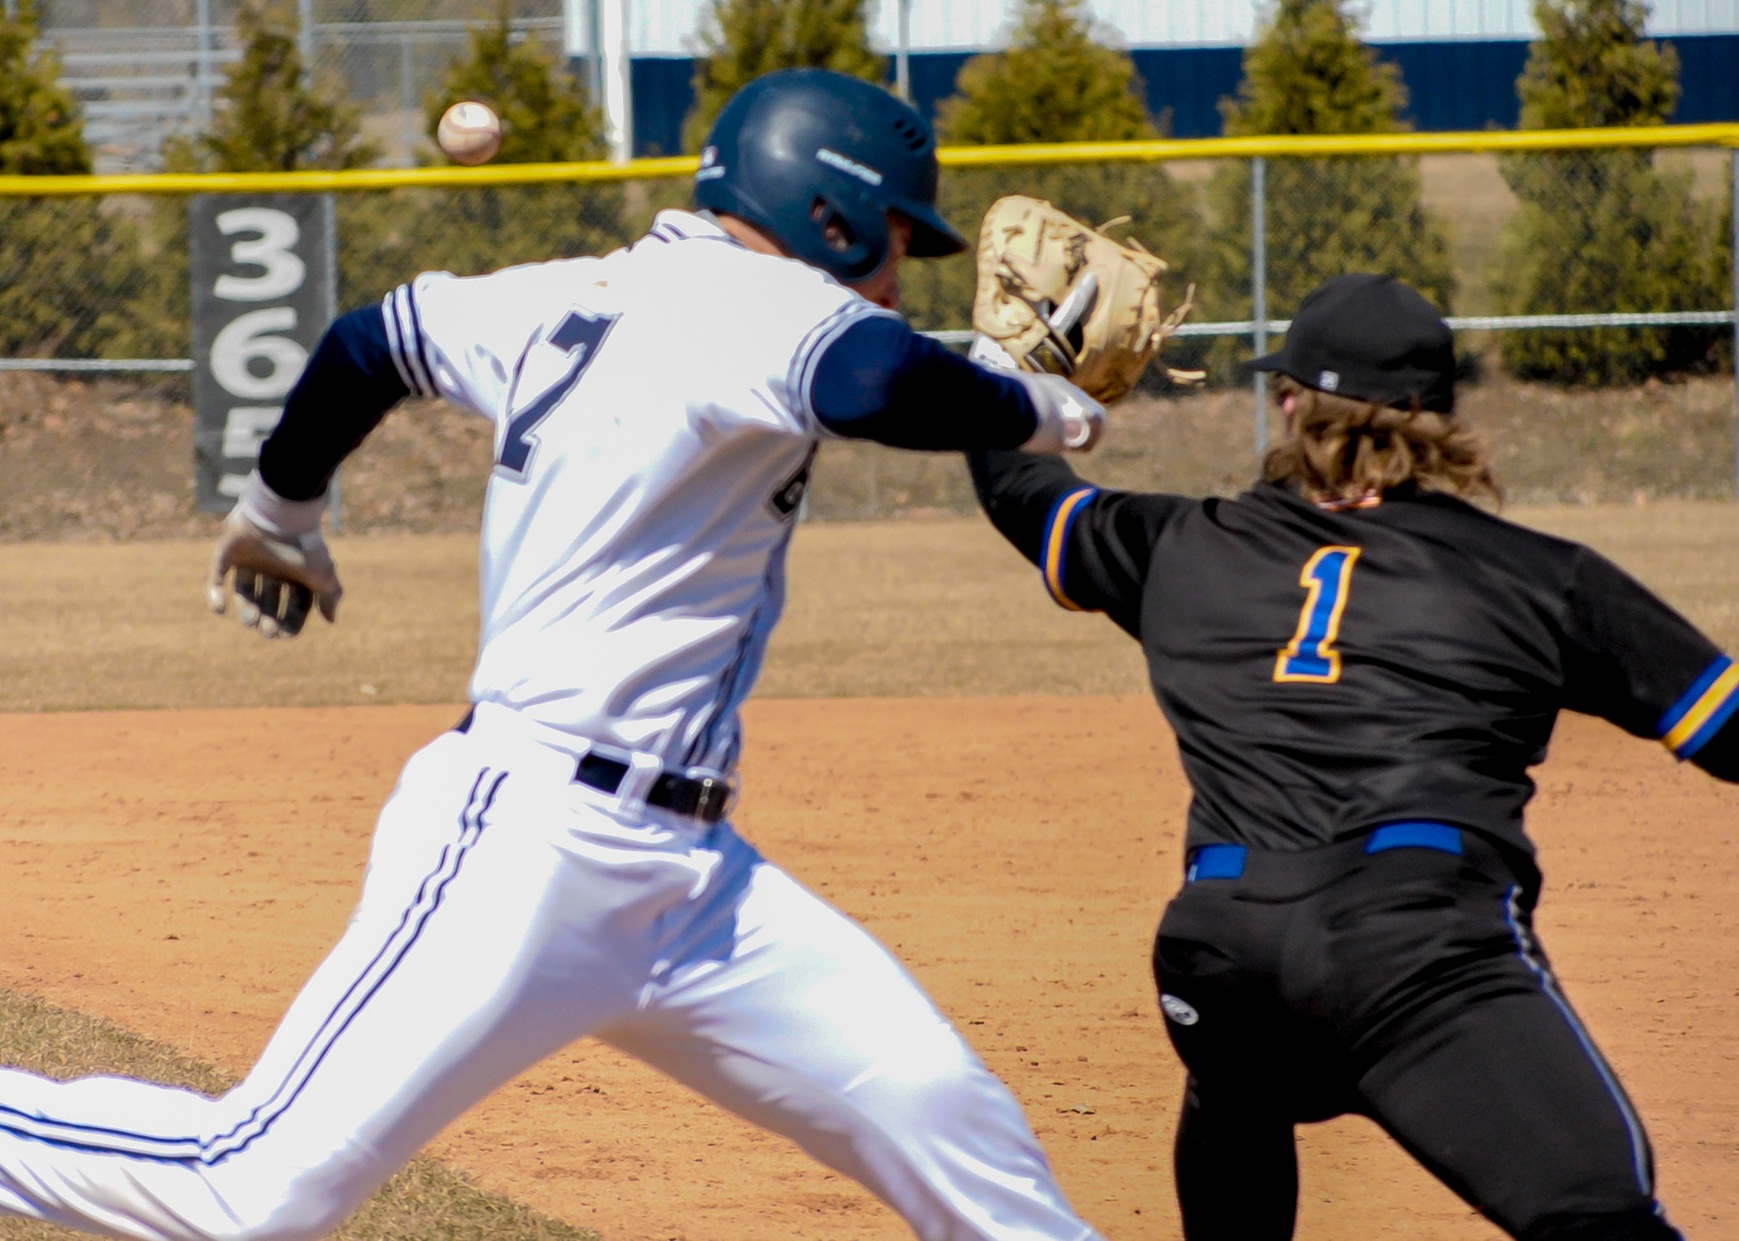 DMACC baseball team avenges earlier loss to IHCC with 5-3 win